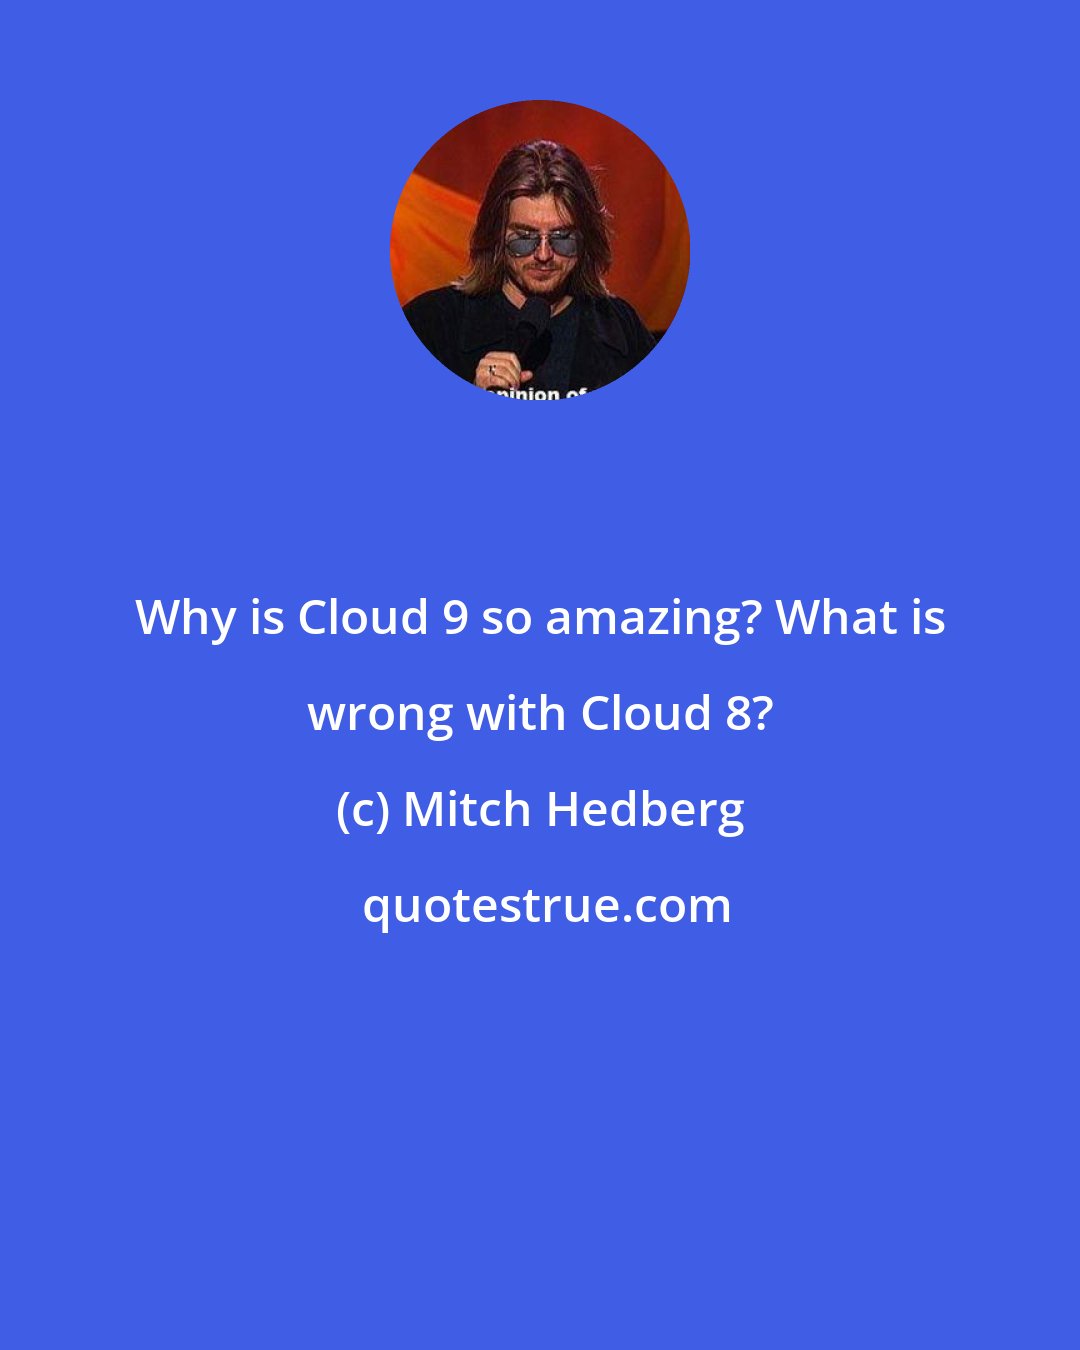 Mitch Hedberg: Why is Cloud 9 so amazing? What is wrong with Cloud 8?